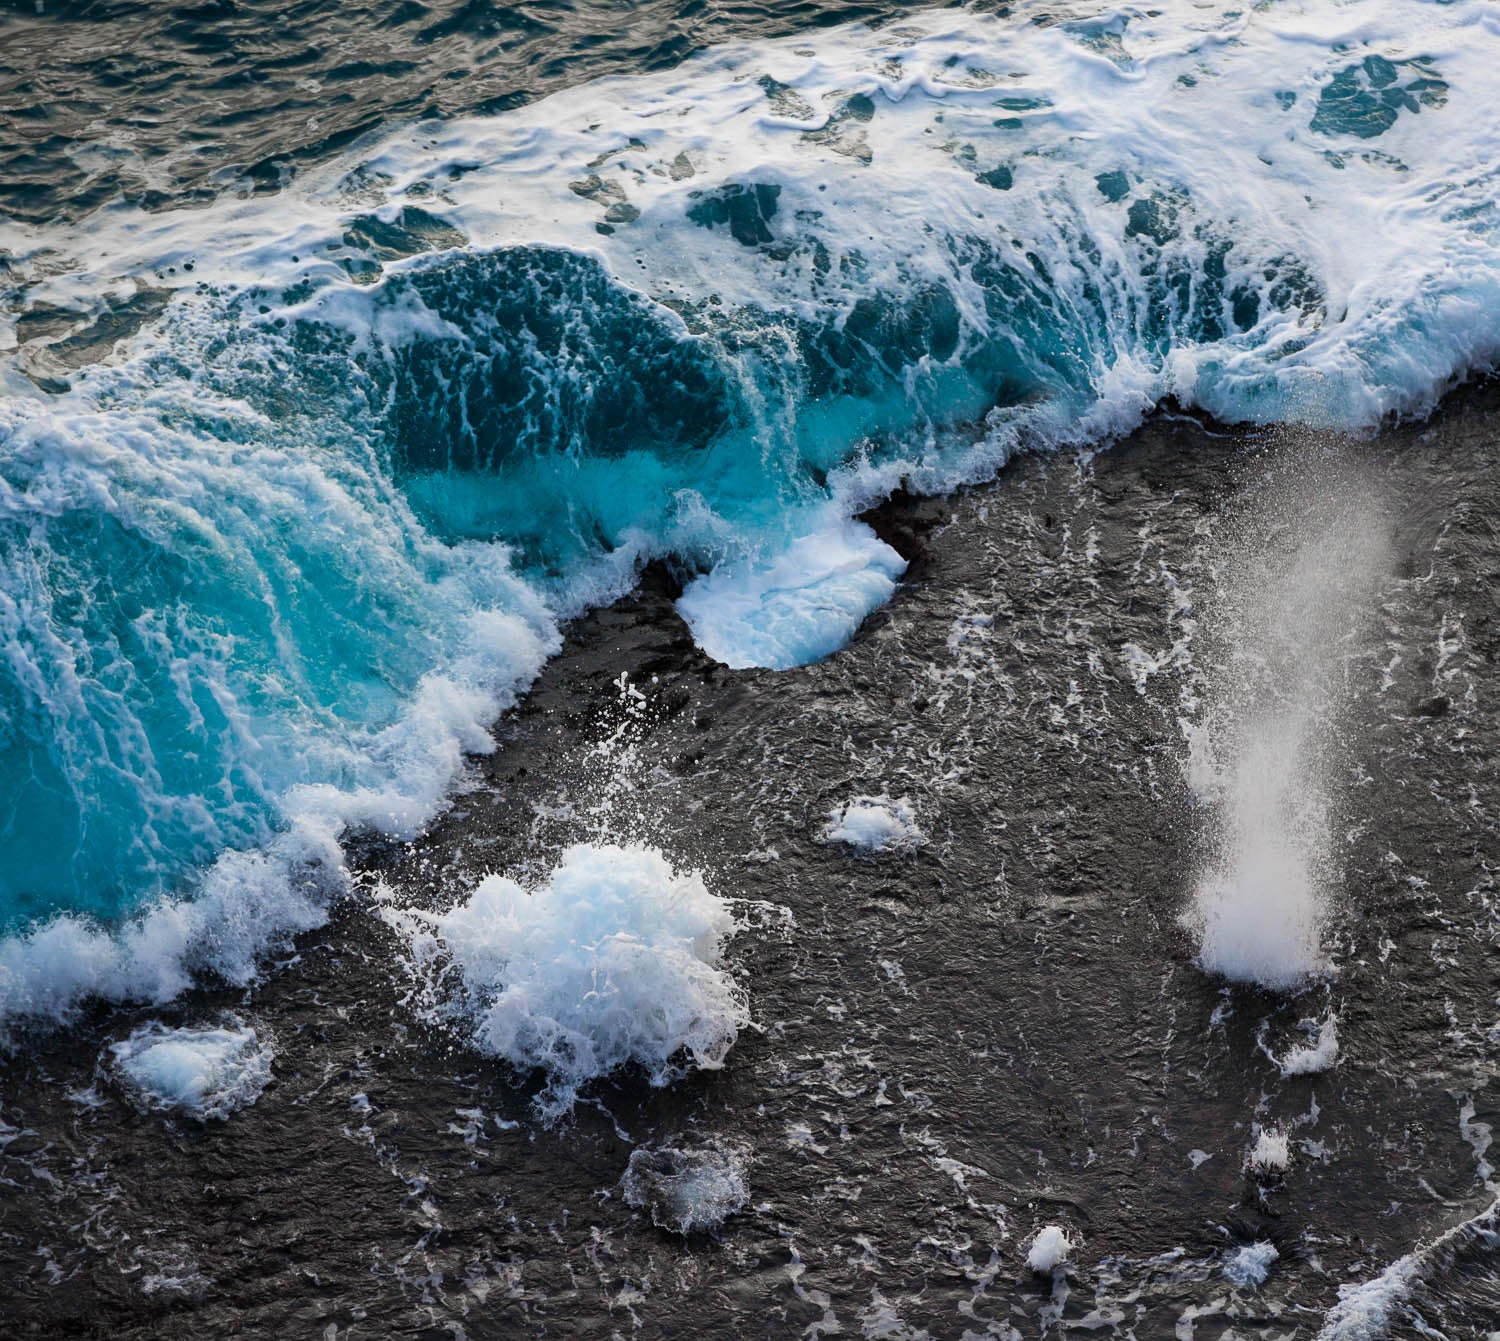 Dense sea waves making giant bubbles of clear blue water with white sea suds, and a grey colored water before and after the bubbling zone, Bubbling Seas 2, Eyre Peninsula  